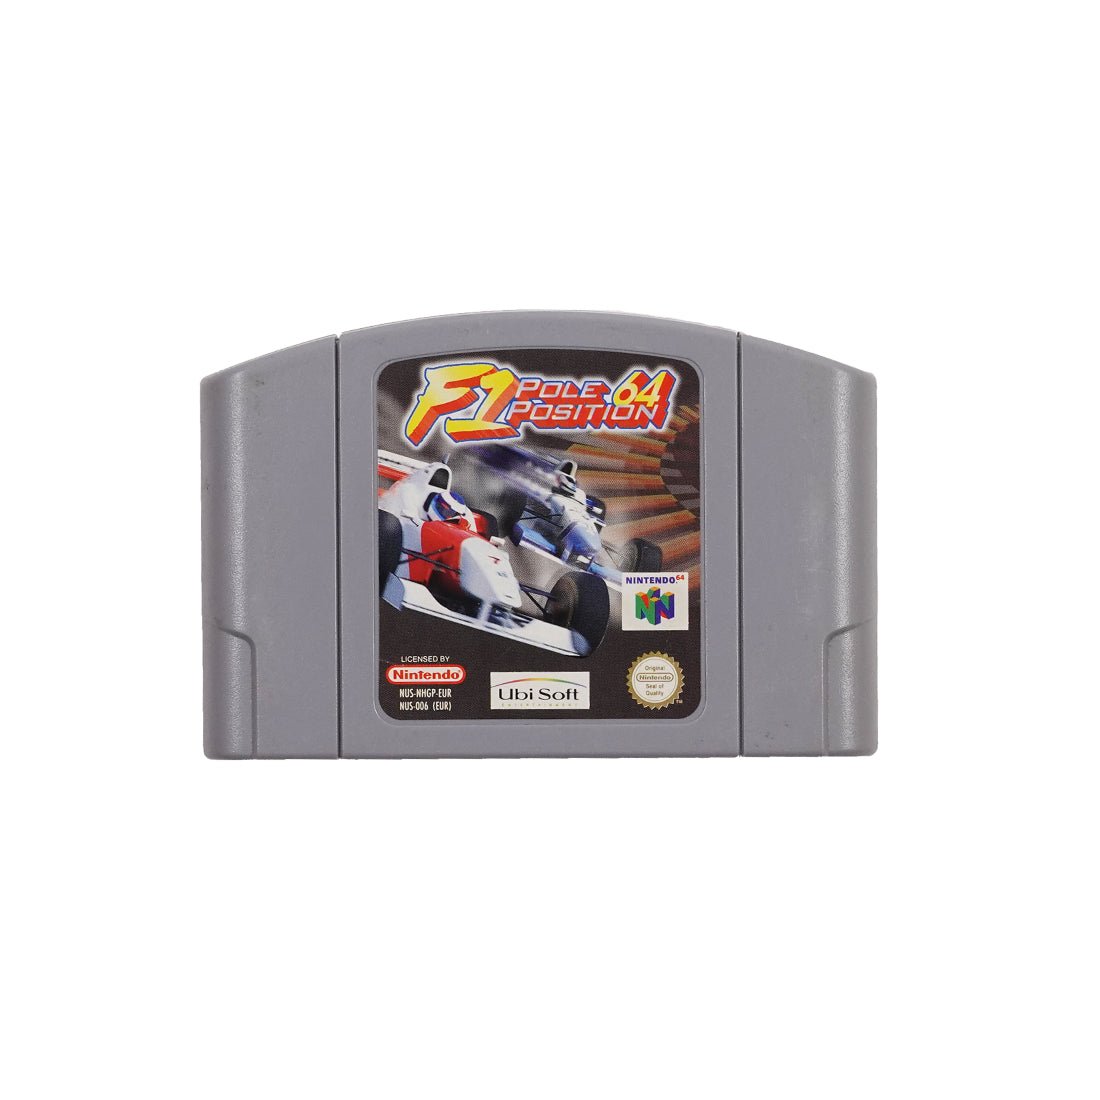 (Pre-Owned) F1 Pole Position 64 - Nintendo 64 - Store 974 | ستور ٩٧٤